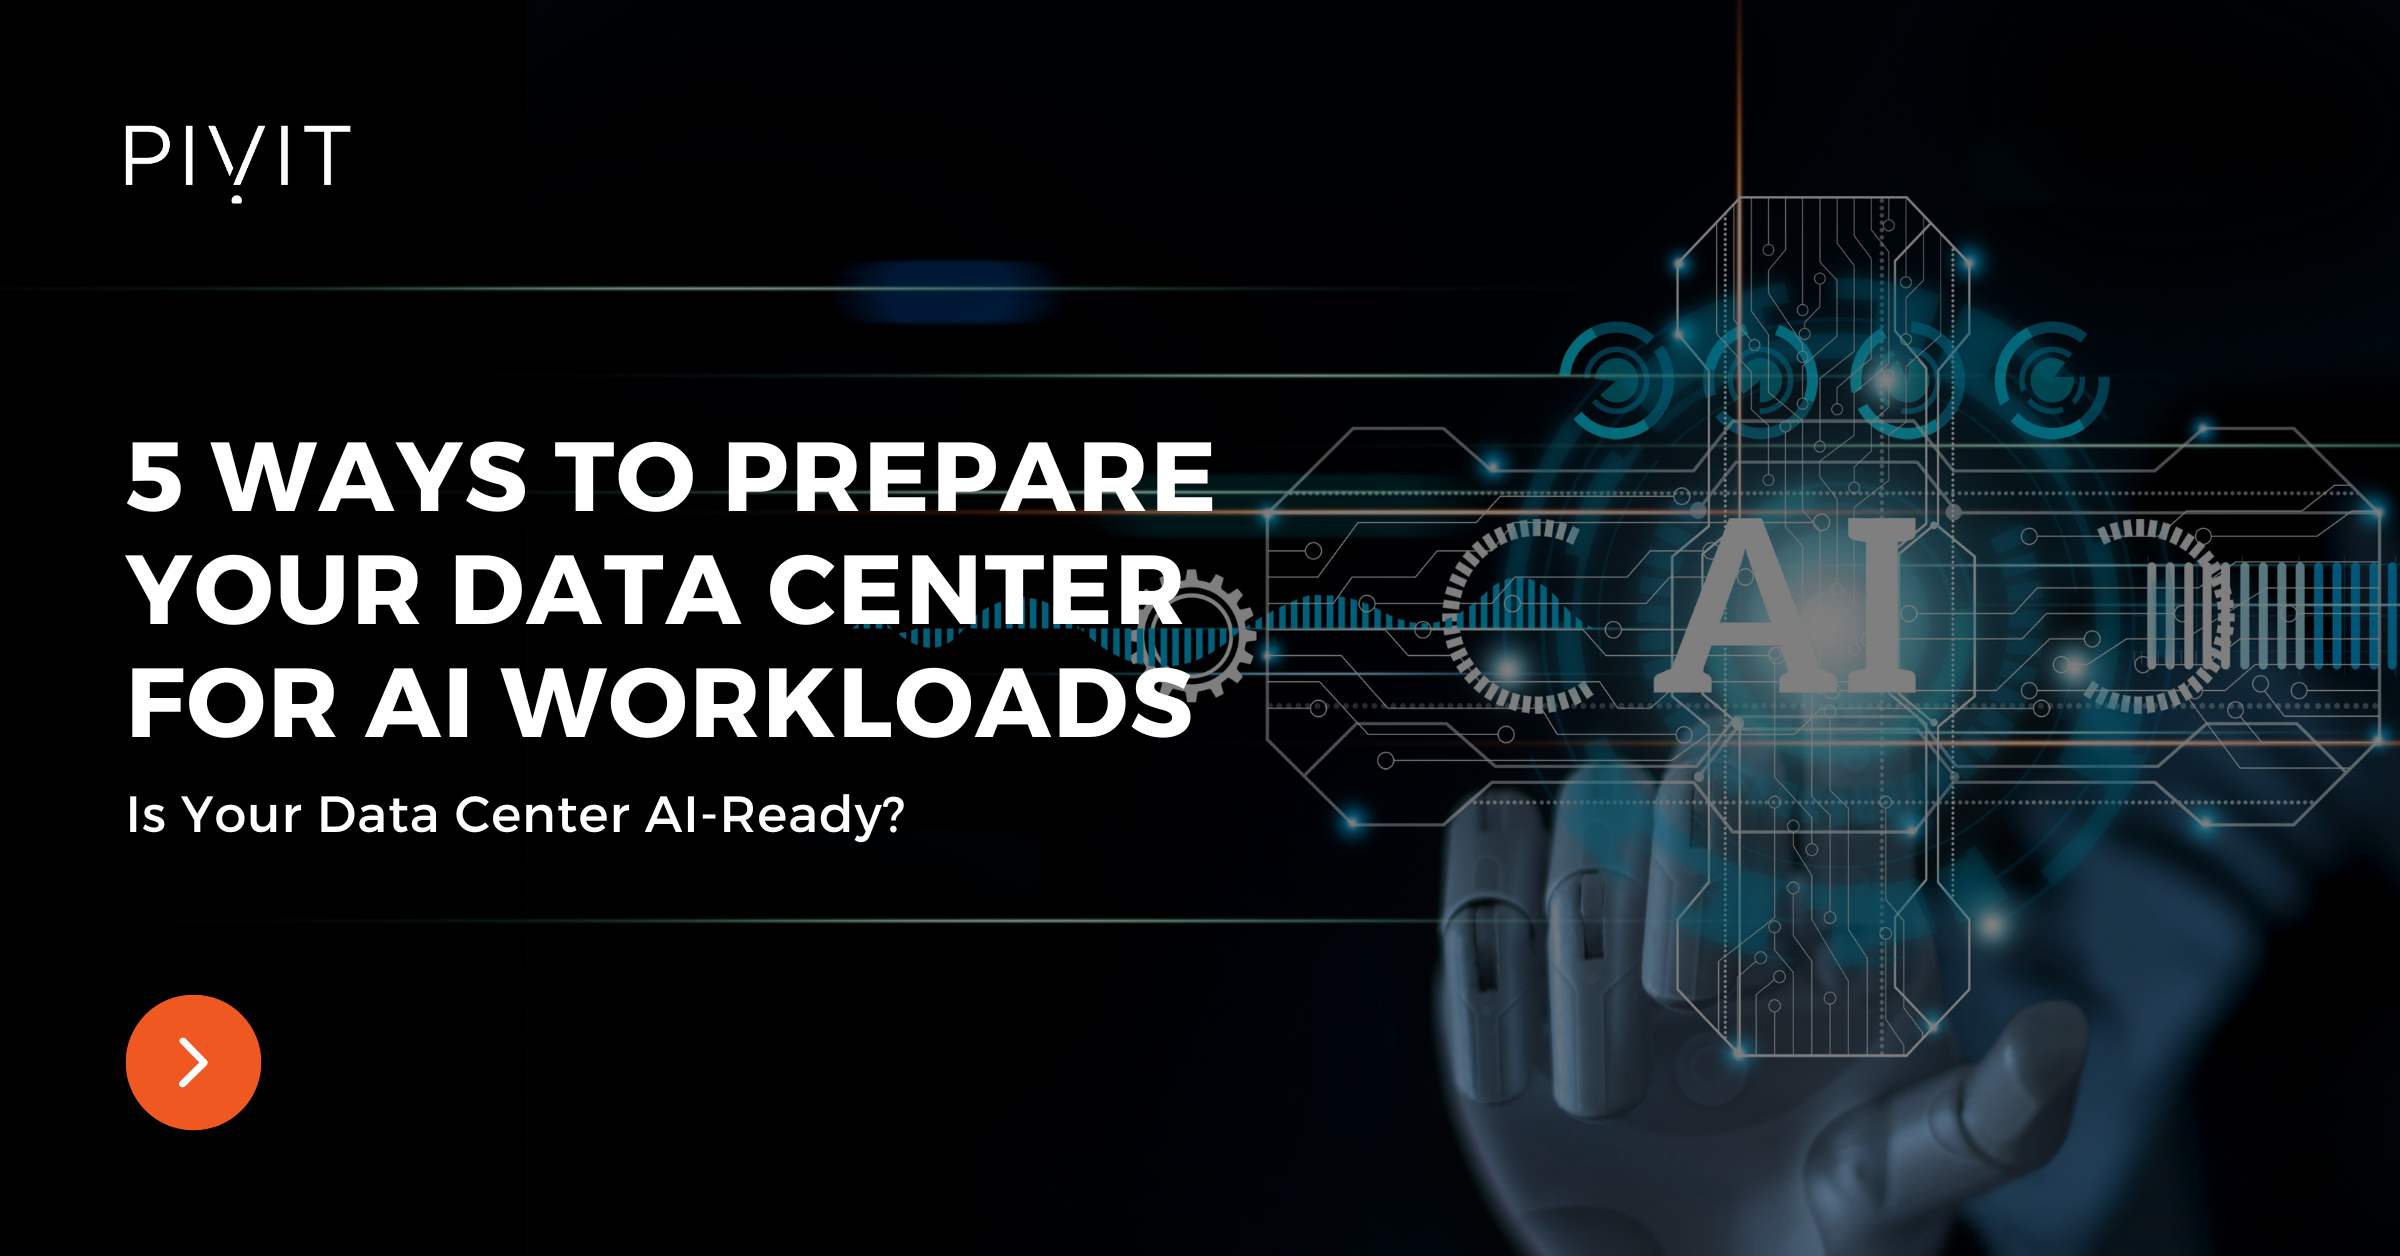 5 Ways to Prepare Your Data Center for AI Workloads